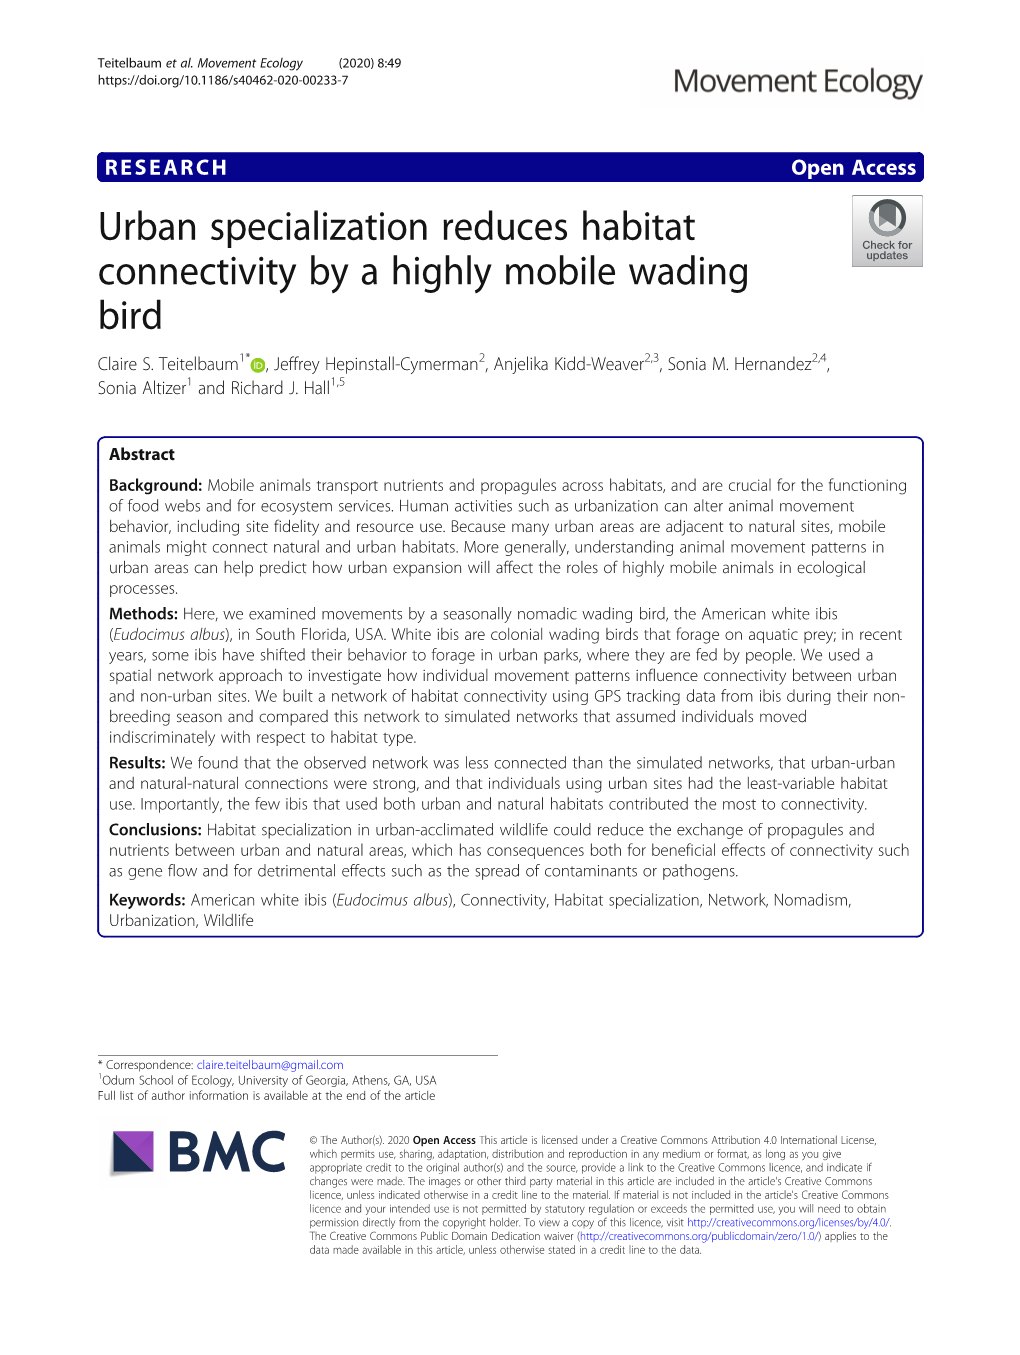 Urban Specialization Reduces Habitat Connectivity by a Highly Mobile Wading Bird Claire S